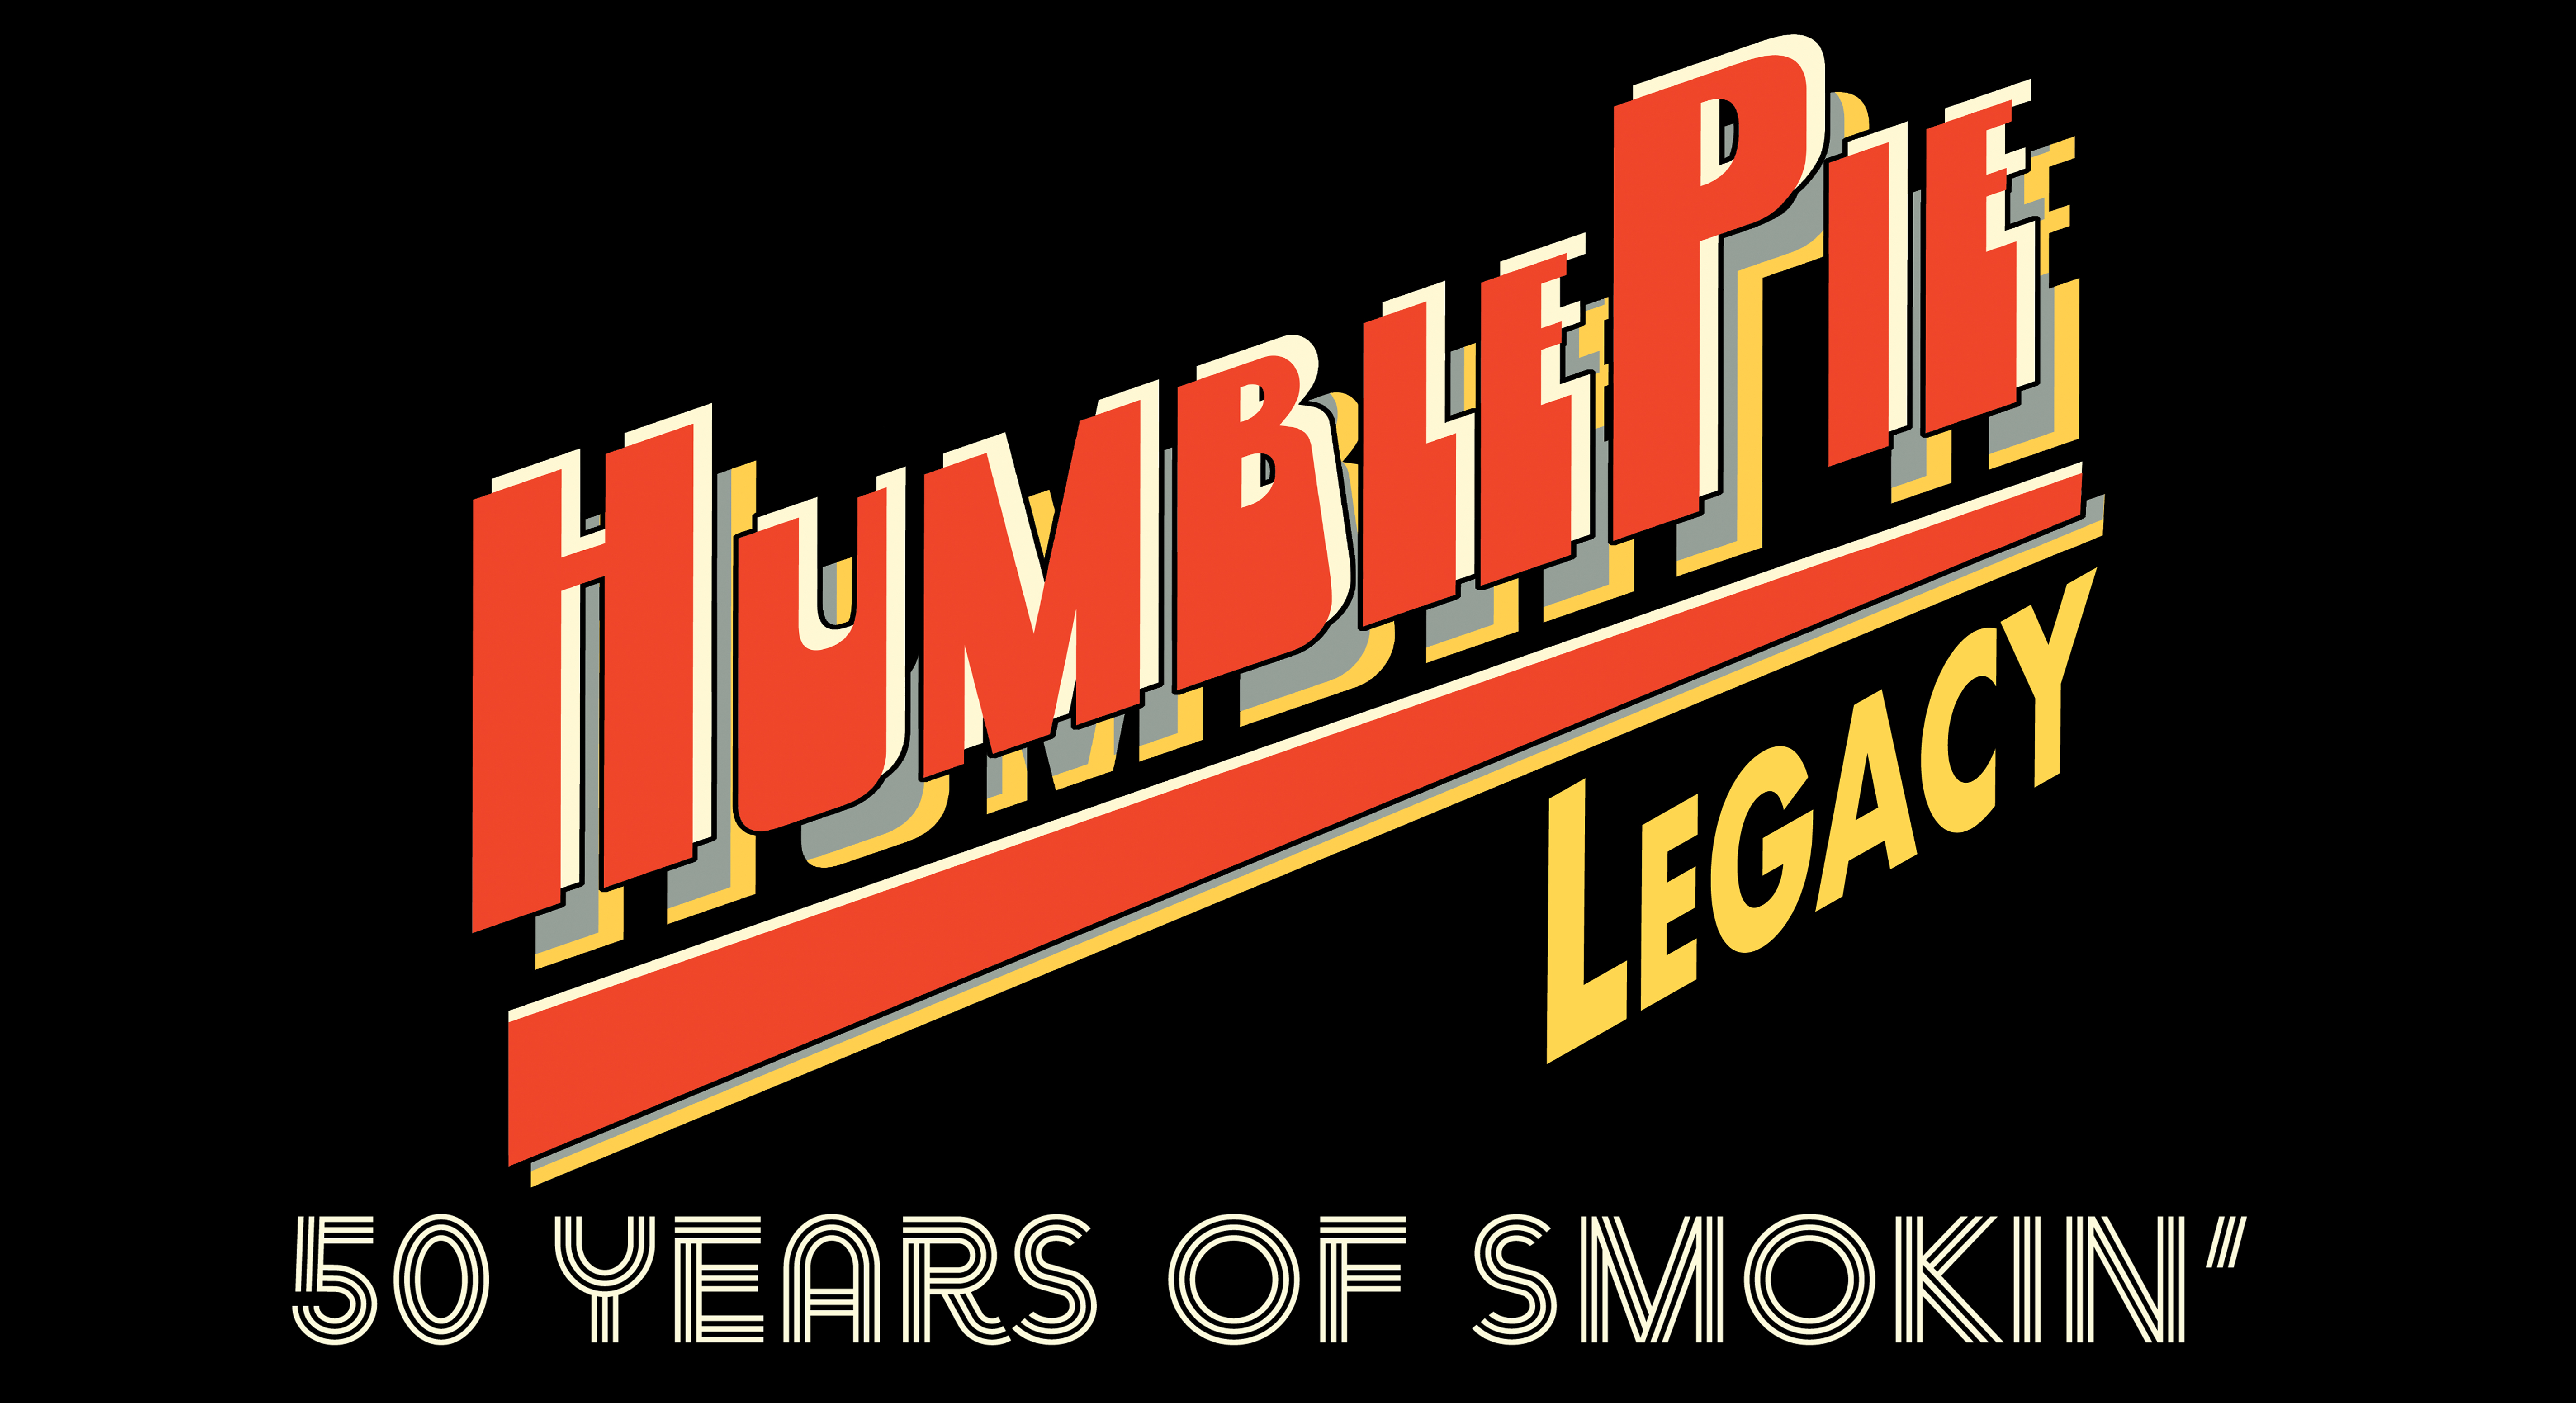 Humble Pie Legacy | Graphic courtesy of HPL